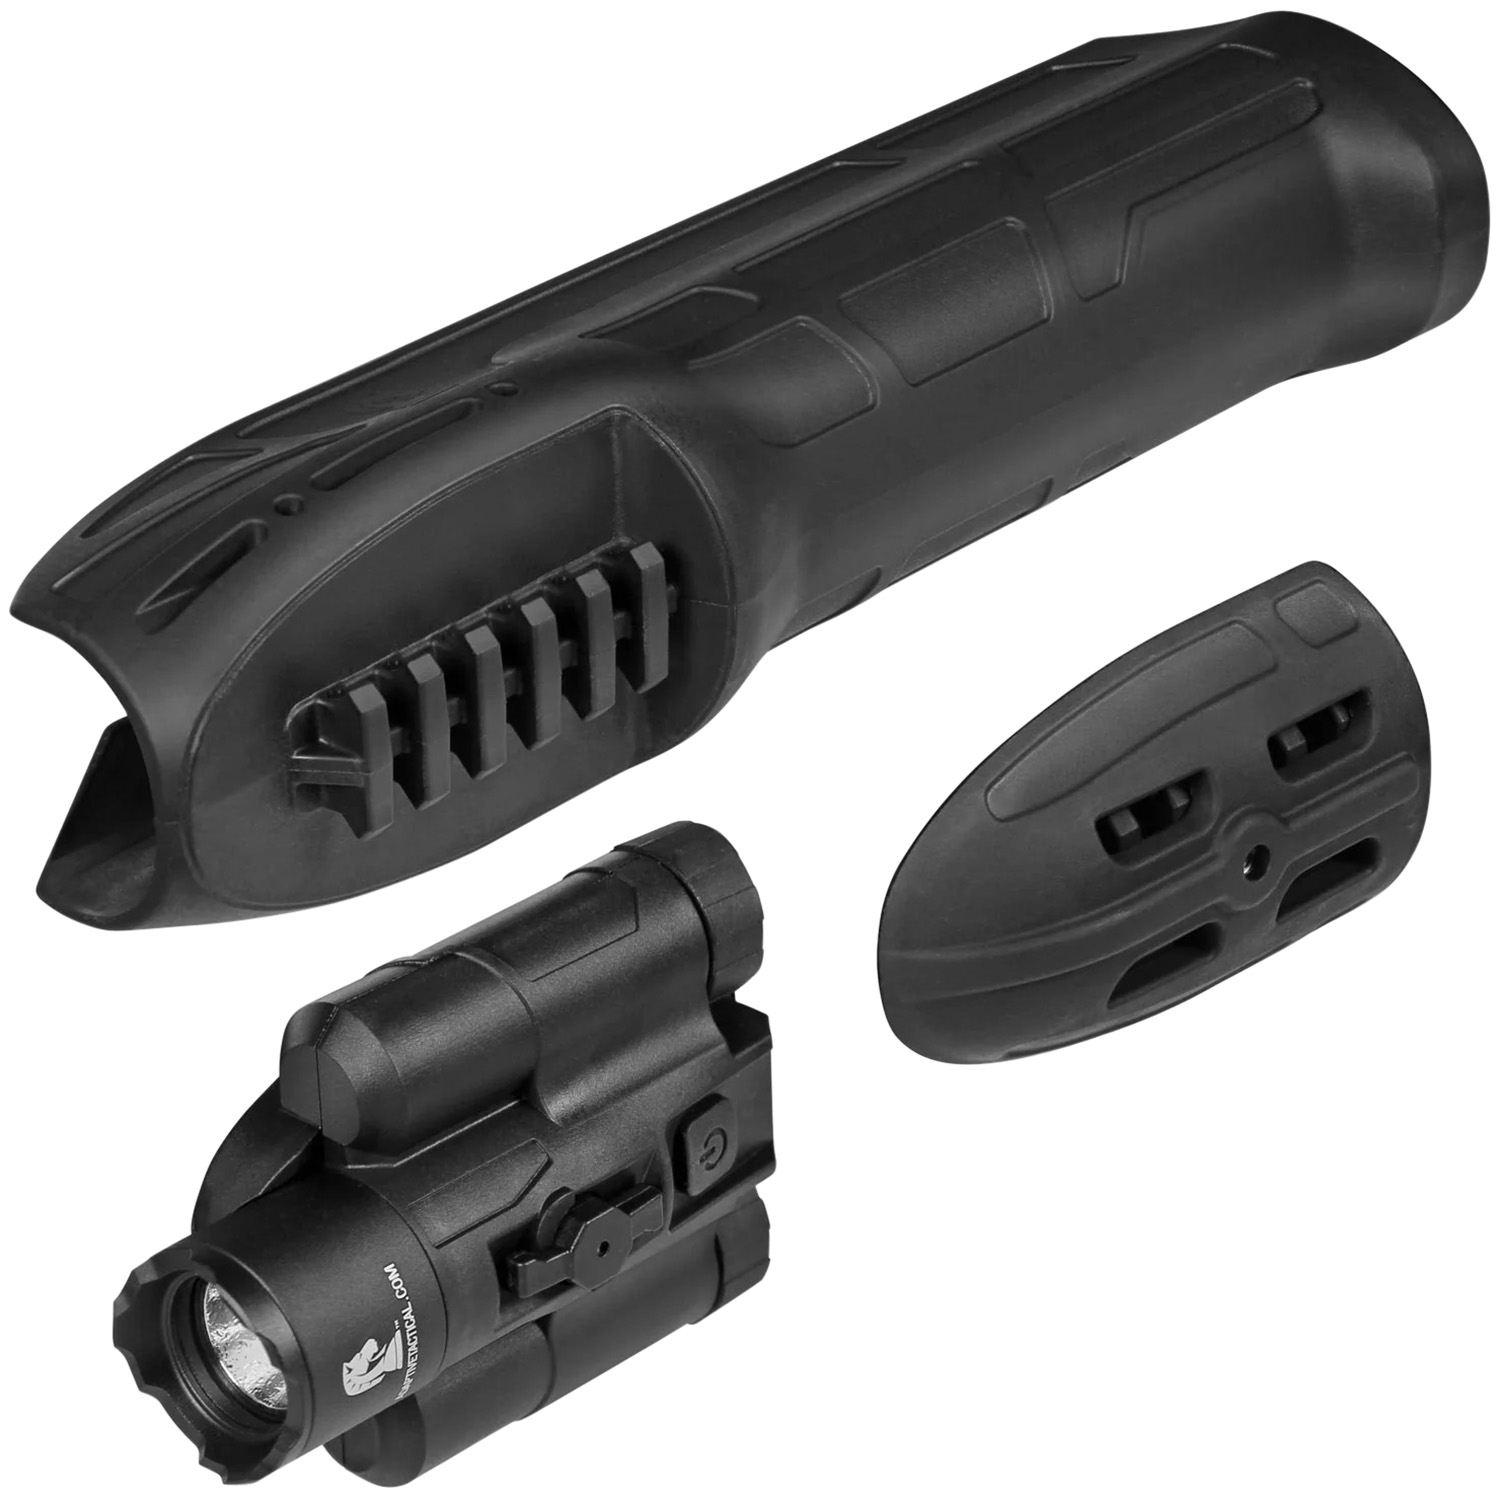 ADAPTIVE TACTICAL AT02900 EX Performance Forend with 300 Lumen Flashlight, Black Polymer, Concealed 2